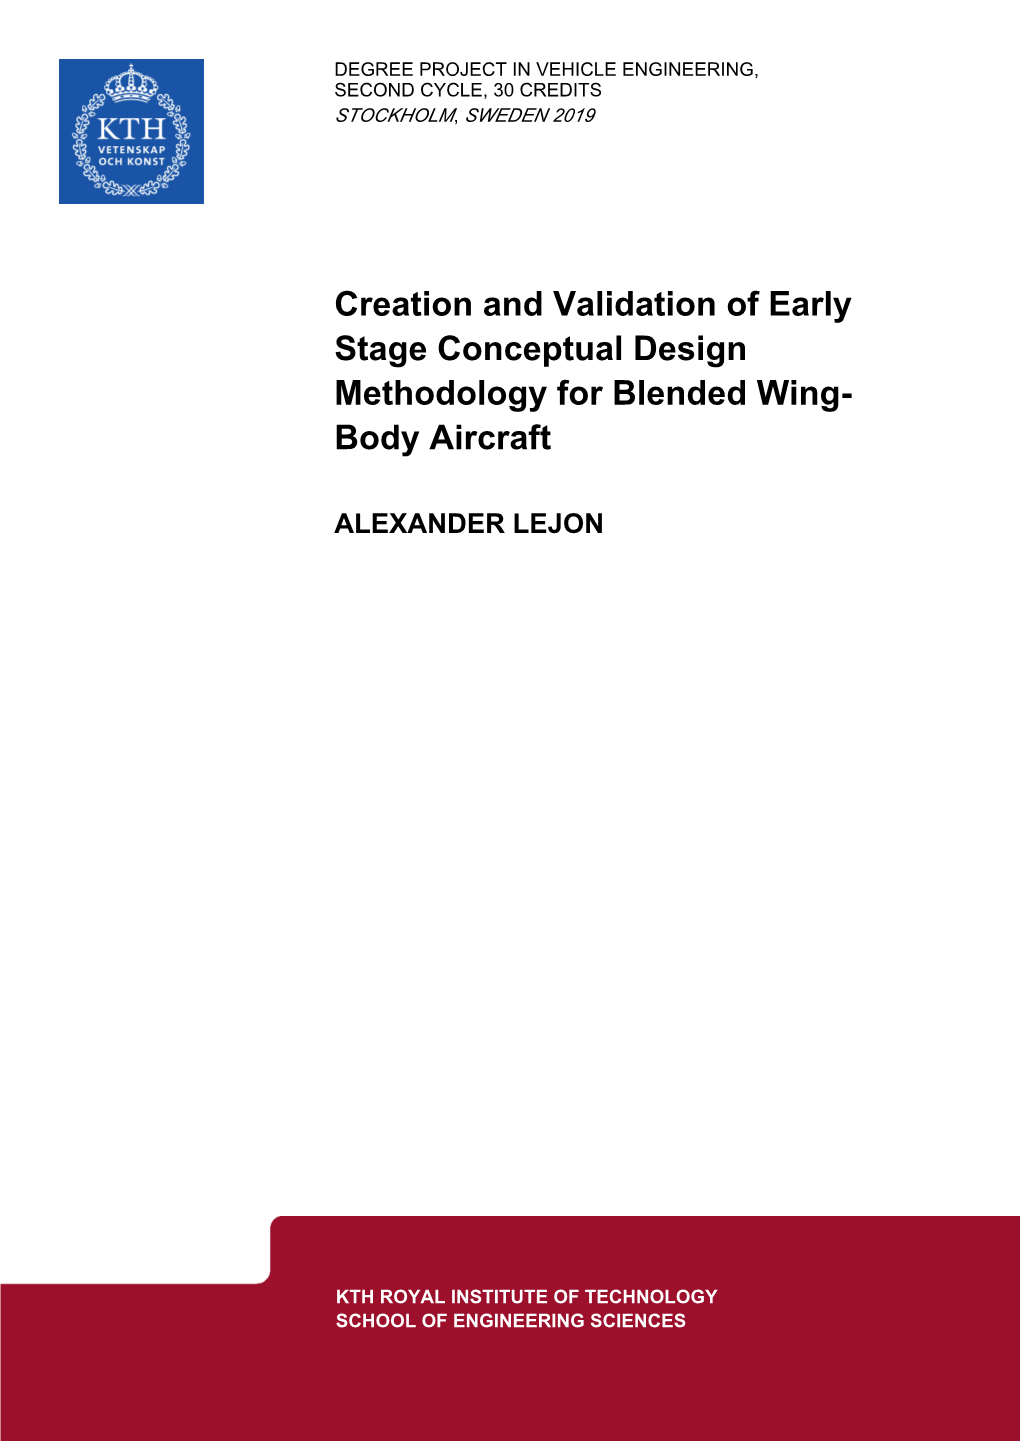 Creation and Validation of Early Stage Conceptual Design Methodology for Blended Wing- Body Aircraft